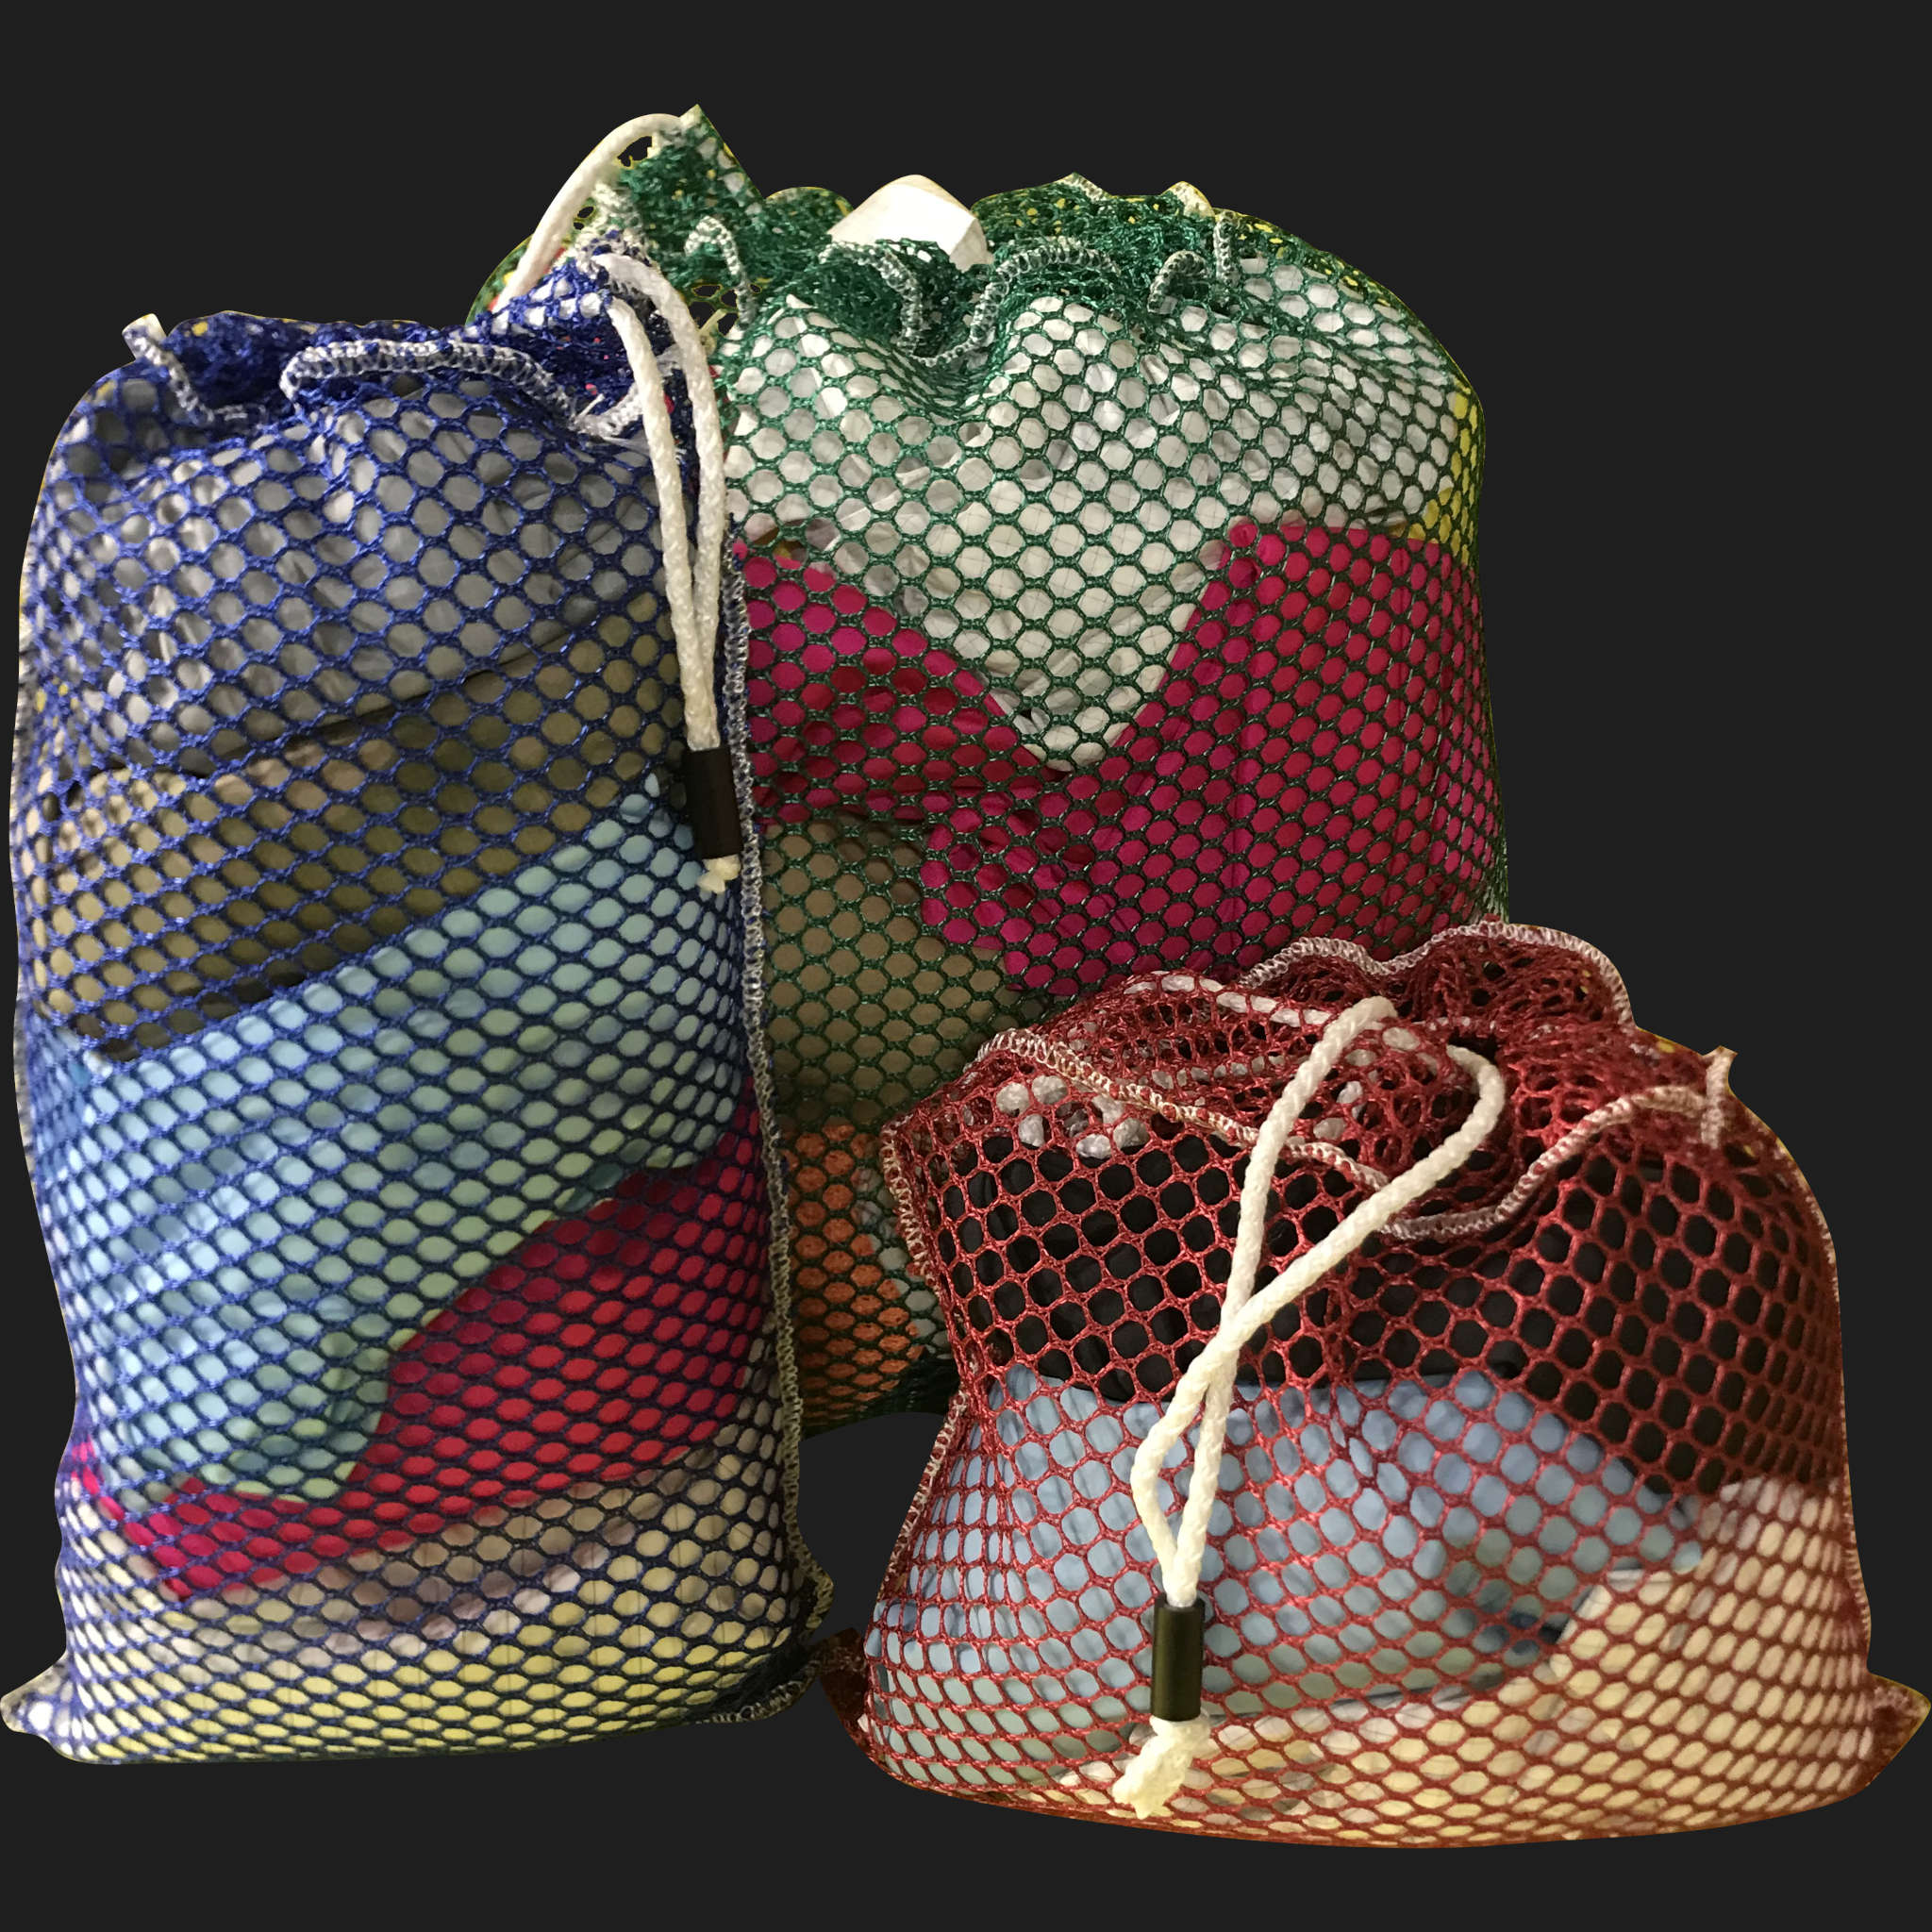 56" x 68" Customized Mesh-Net-Laundry Bags Heavy Duty with Cord and barrellock closure